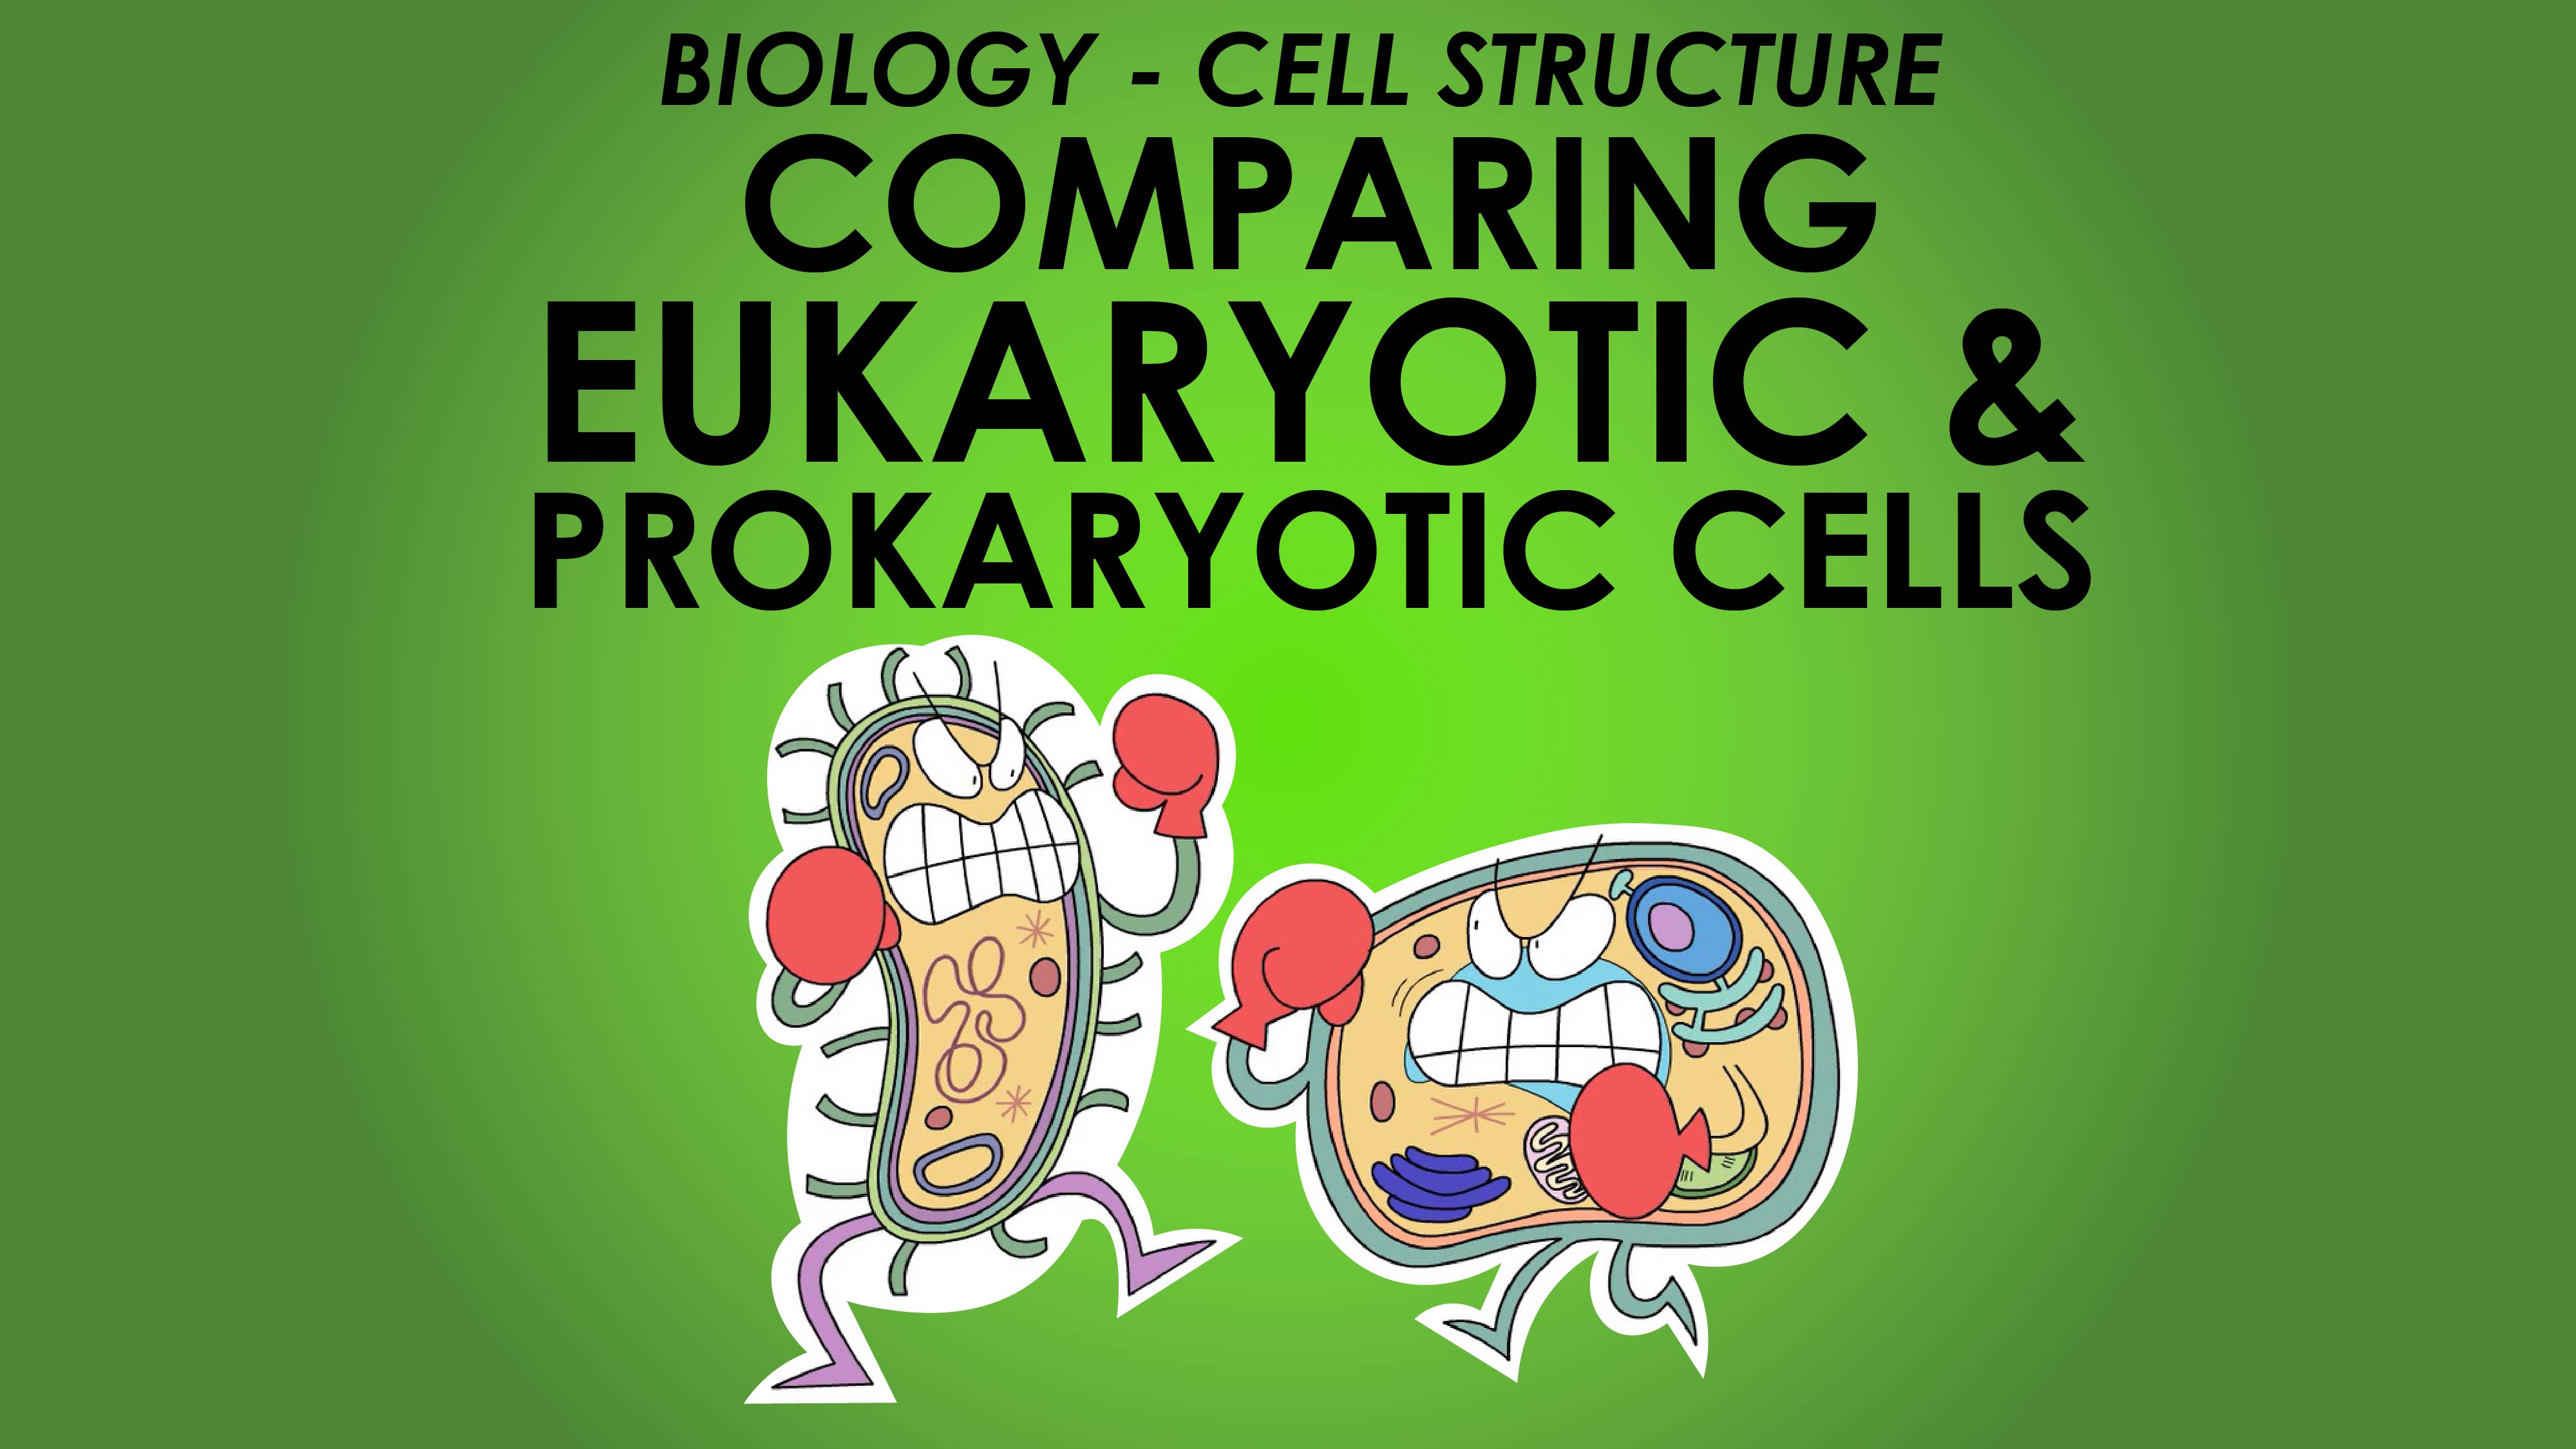 Comparing Prokaryotic and Eukaryotic Cells - Cell Structure